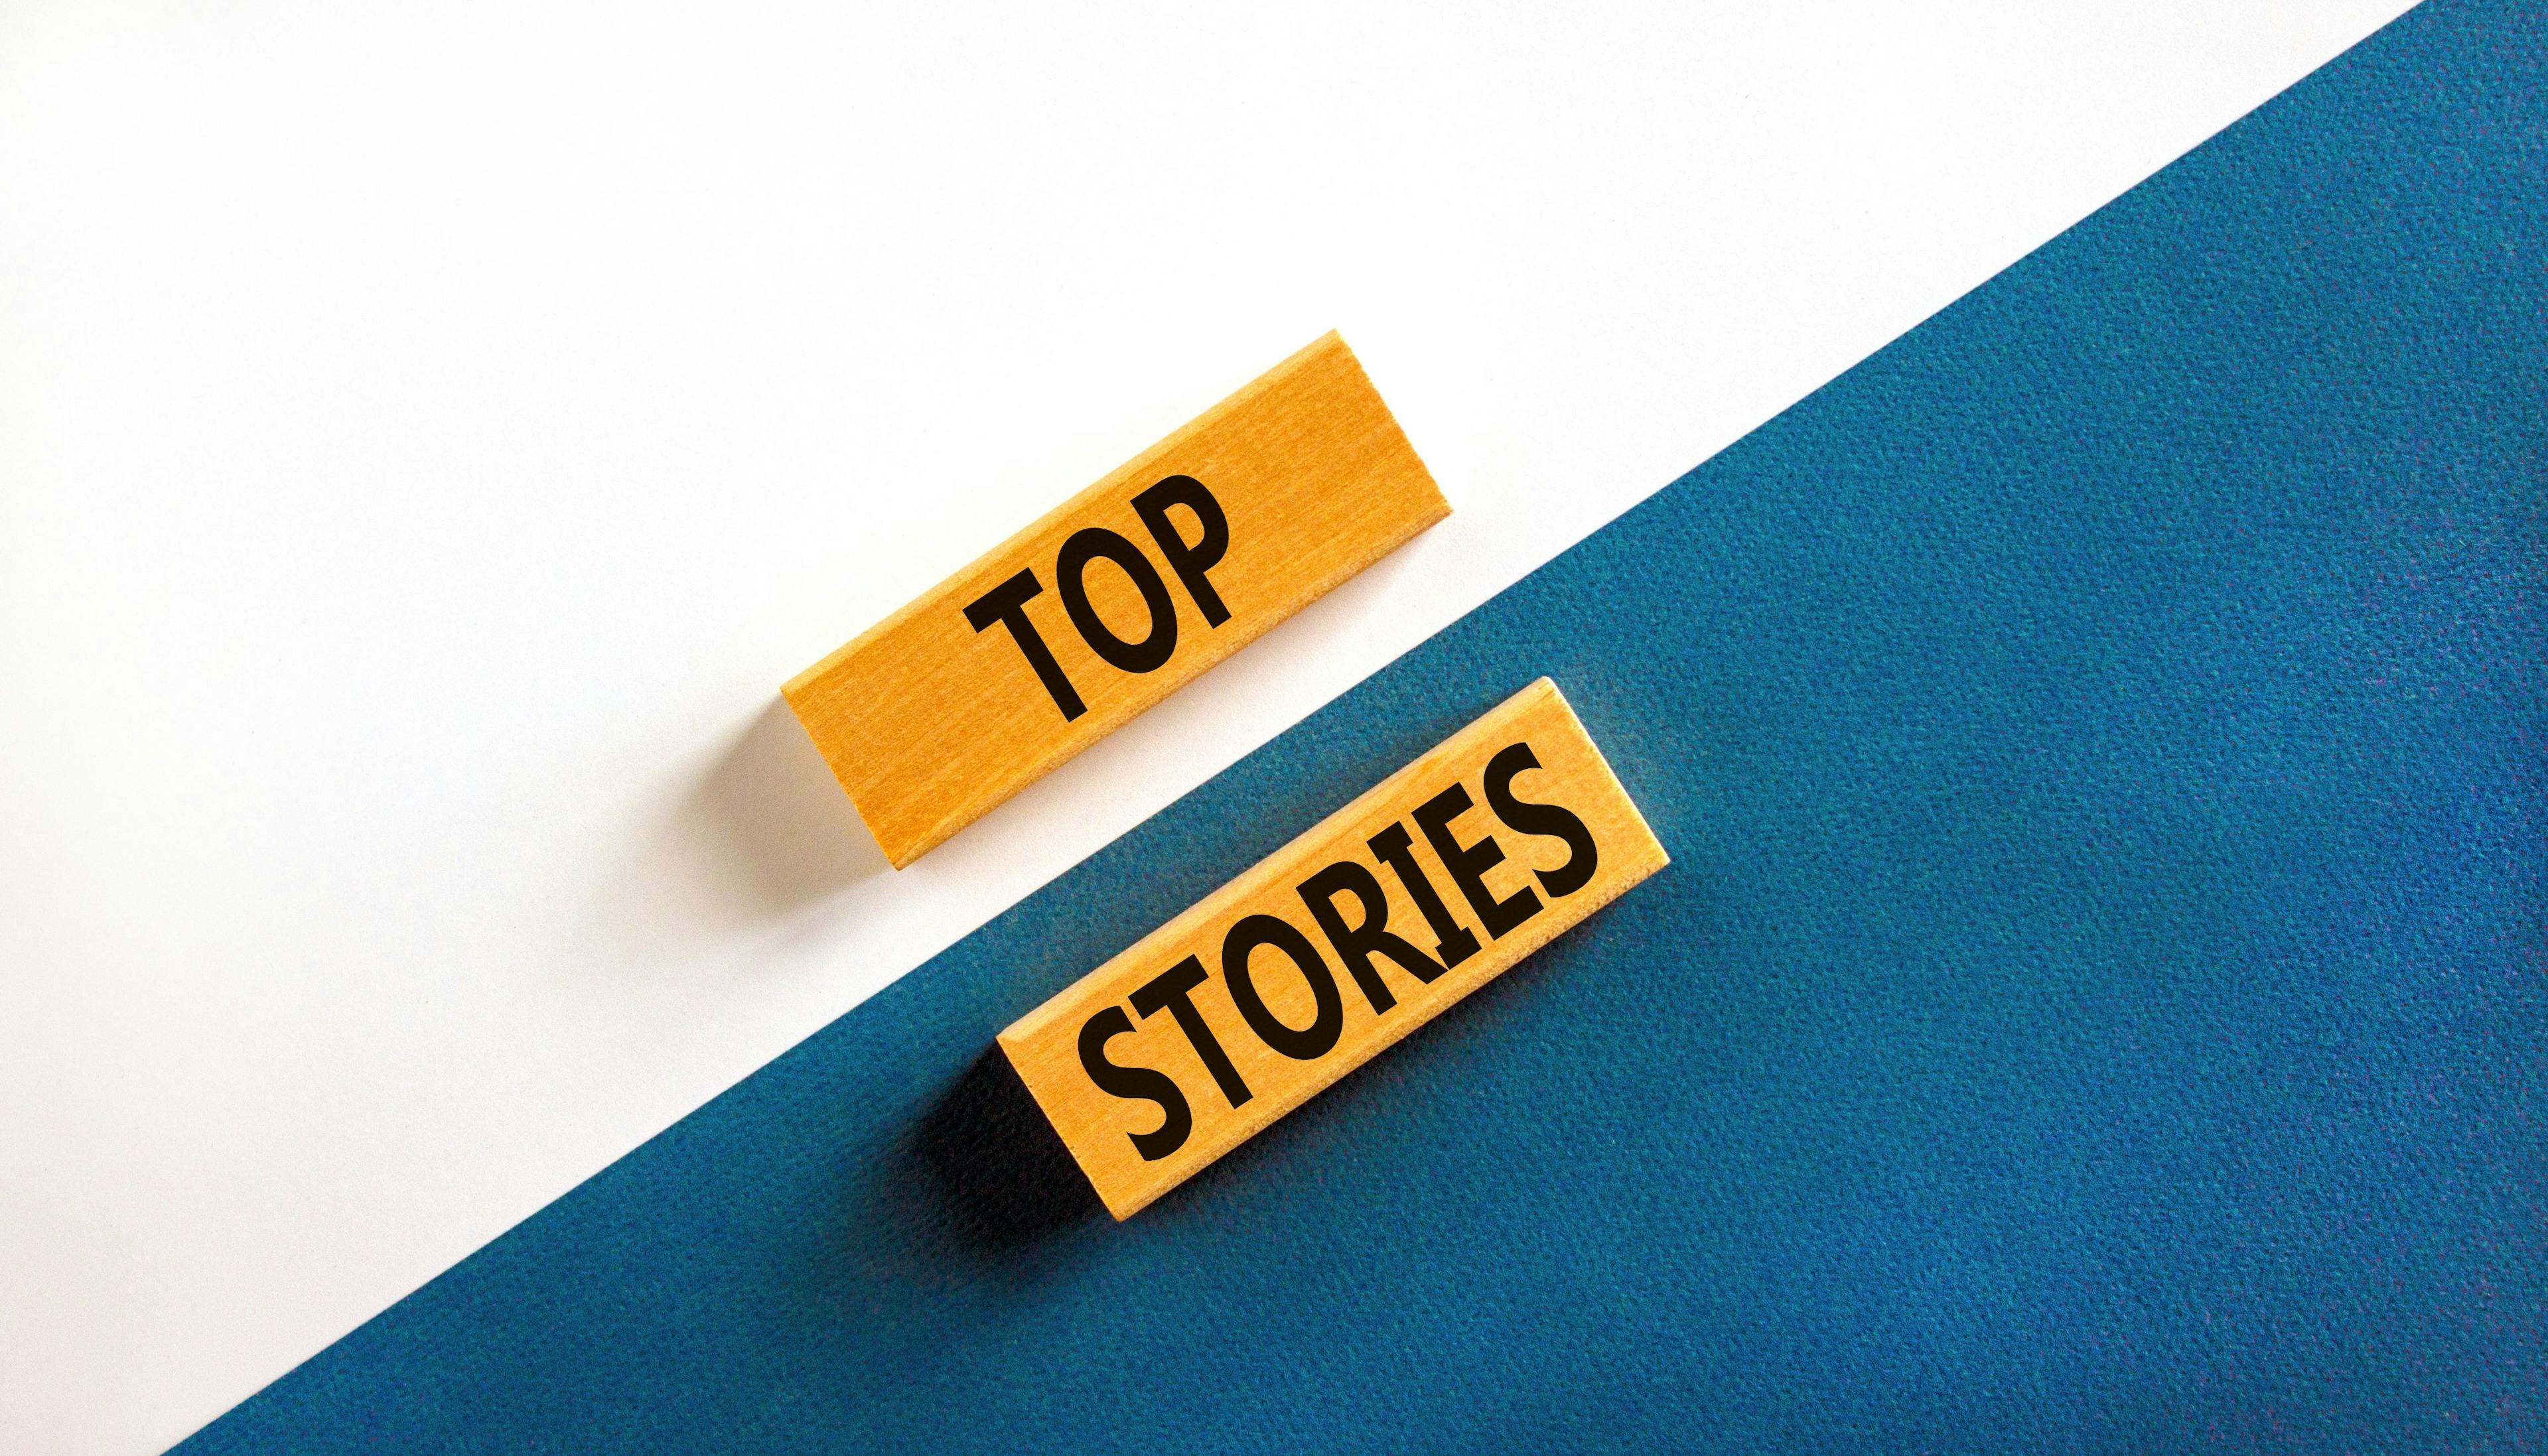 Top stories symbol. Concept words Top stories on wooden blocks on a beautiful blue table white background. Business story and top stories concept, copy space. | Image Credit: © Dzmitry - stock.adobe.com